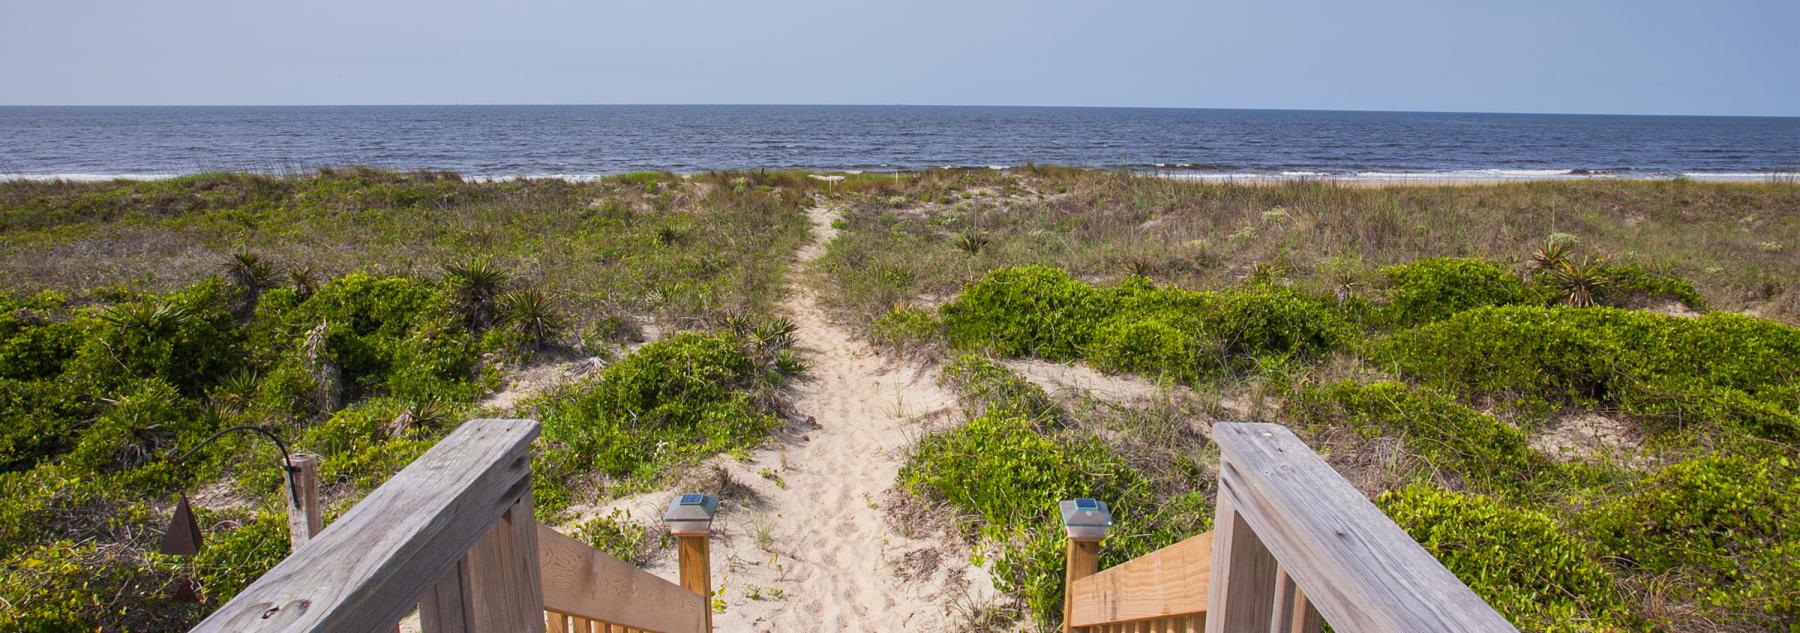 View of Oak Island beach from a vacation rental home